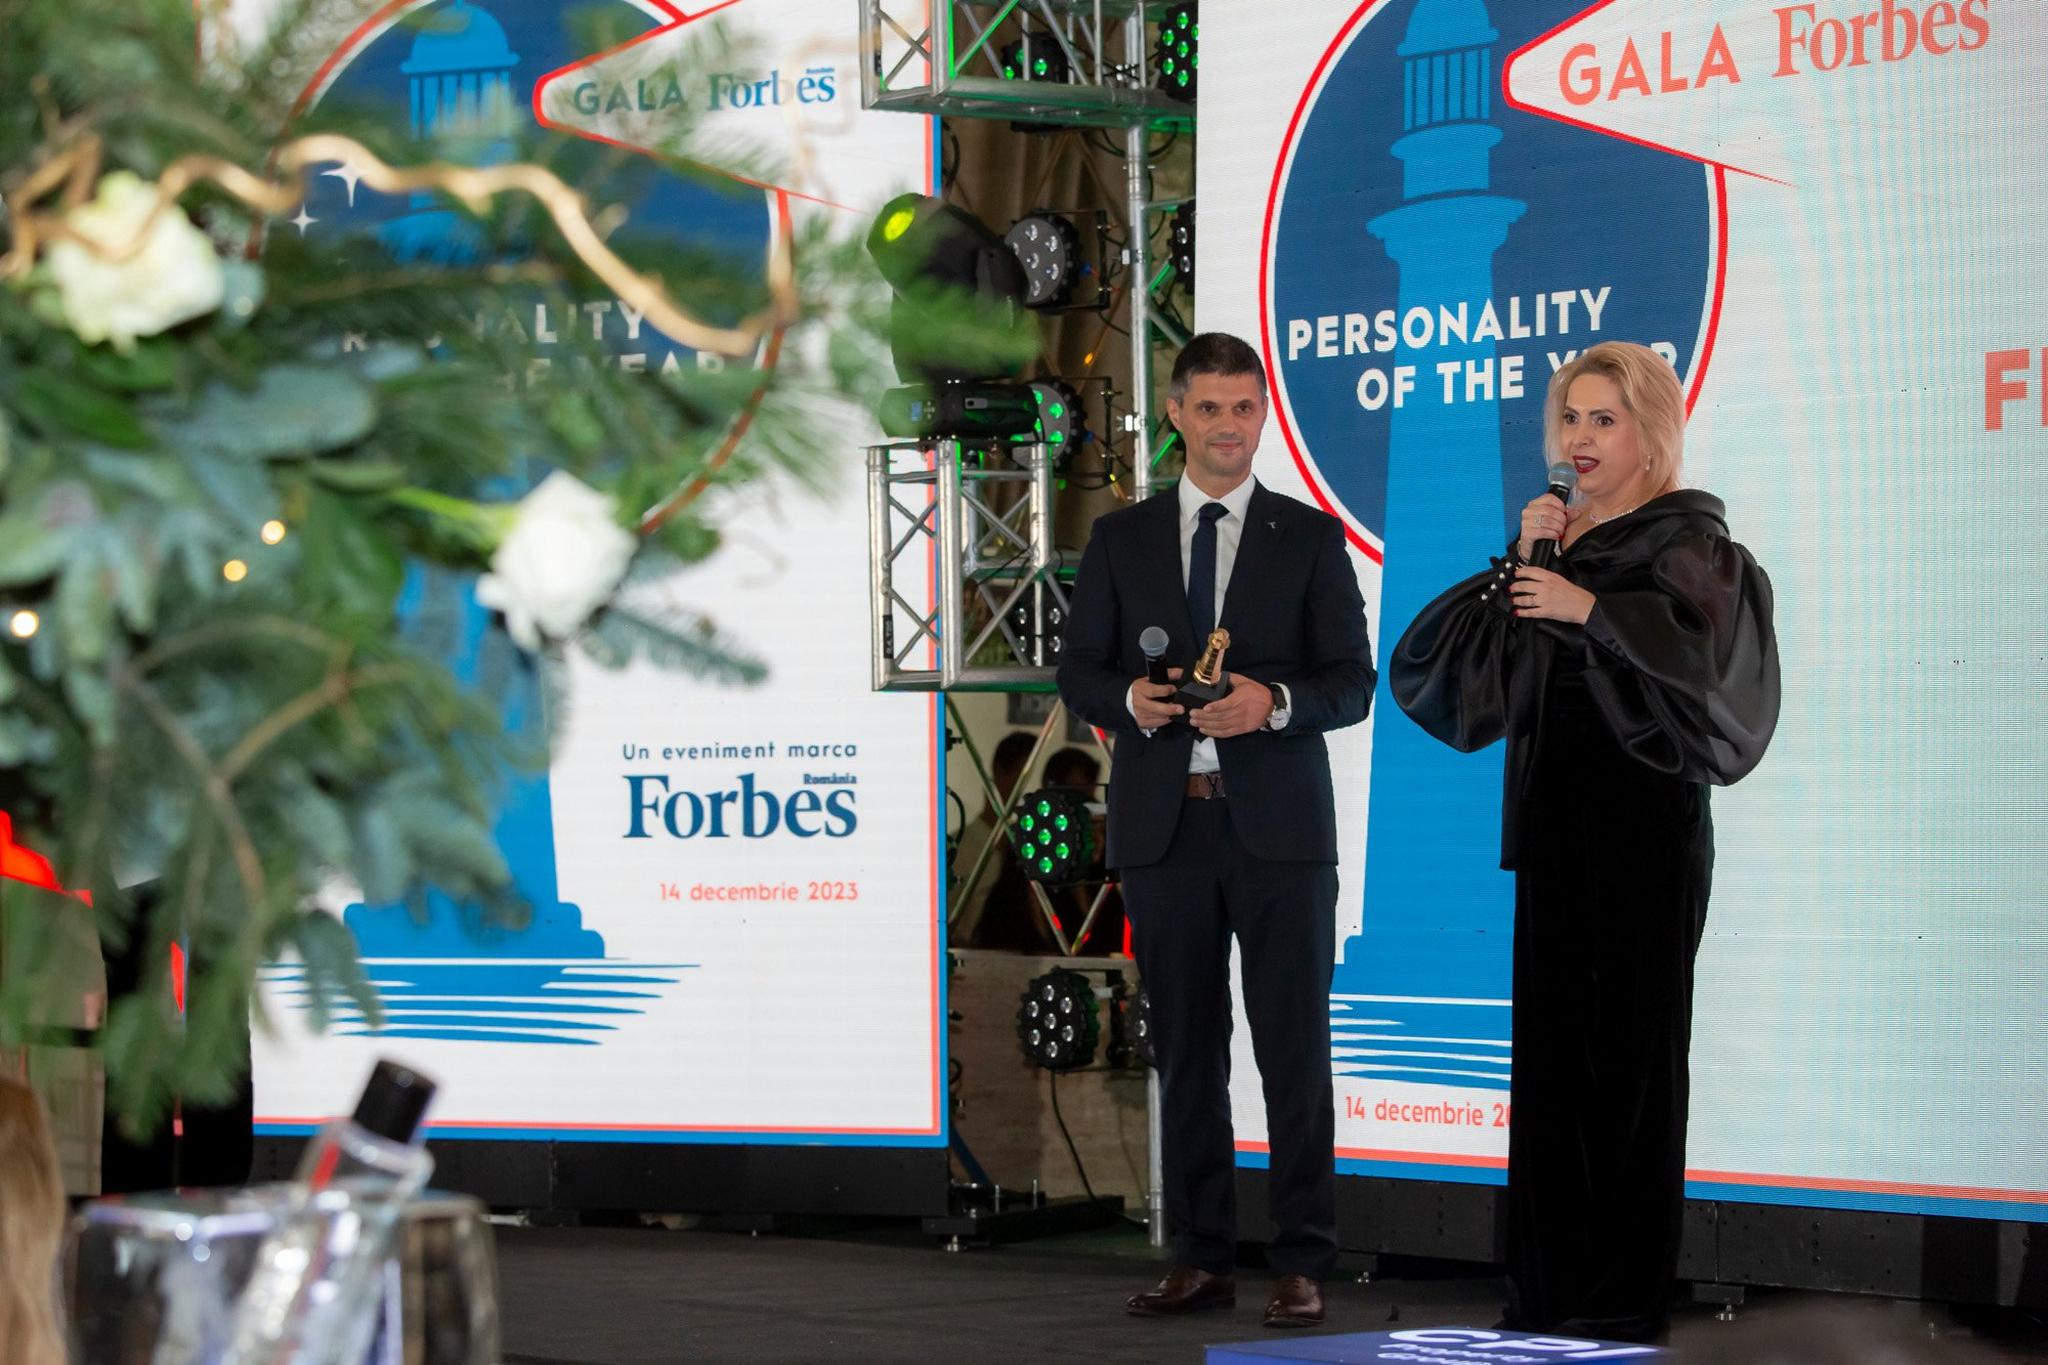 florin-enache-geanina-enache-personality-of-the-year-2023-forbes